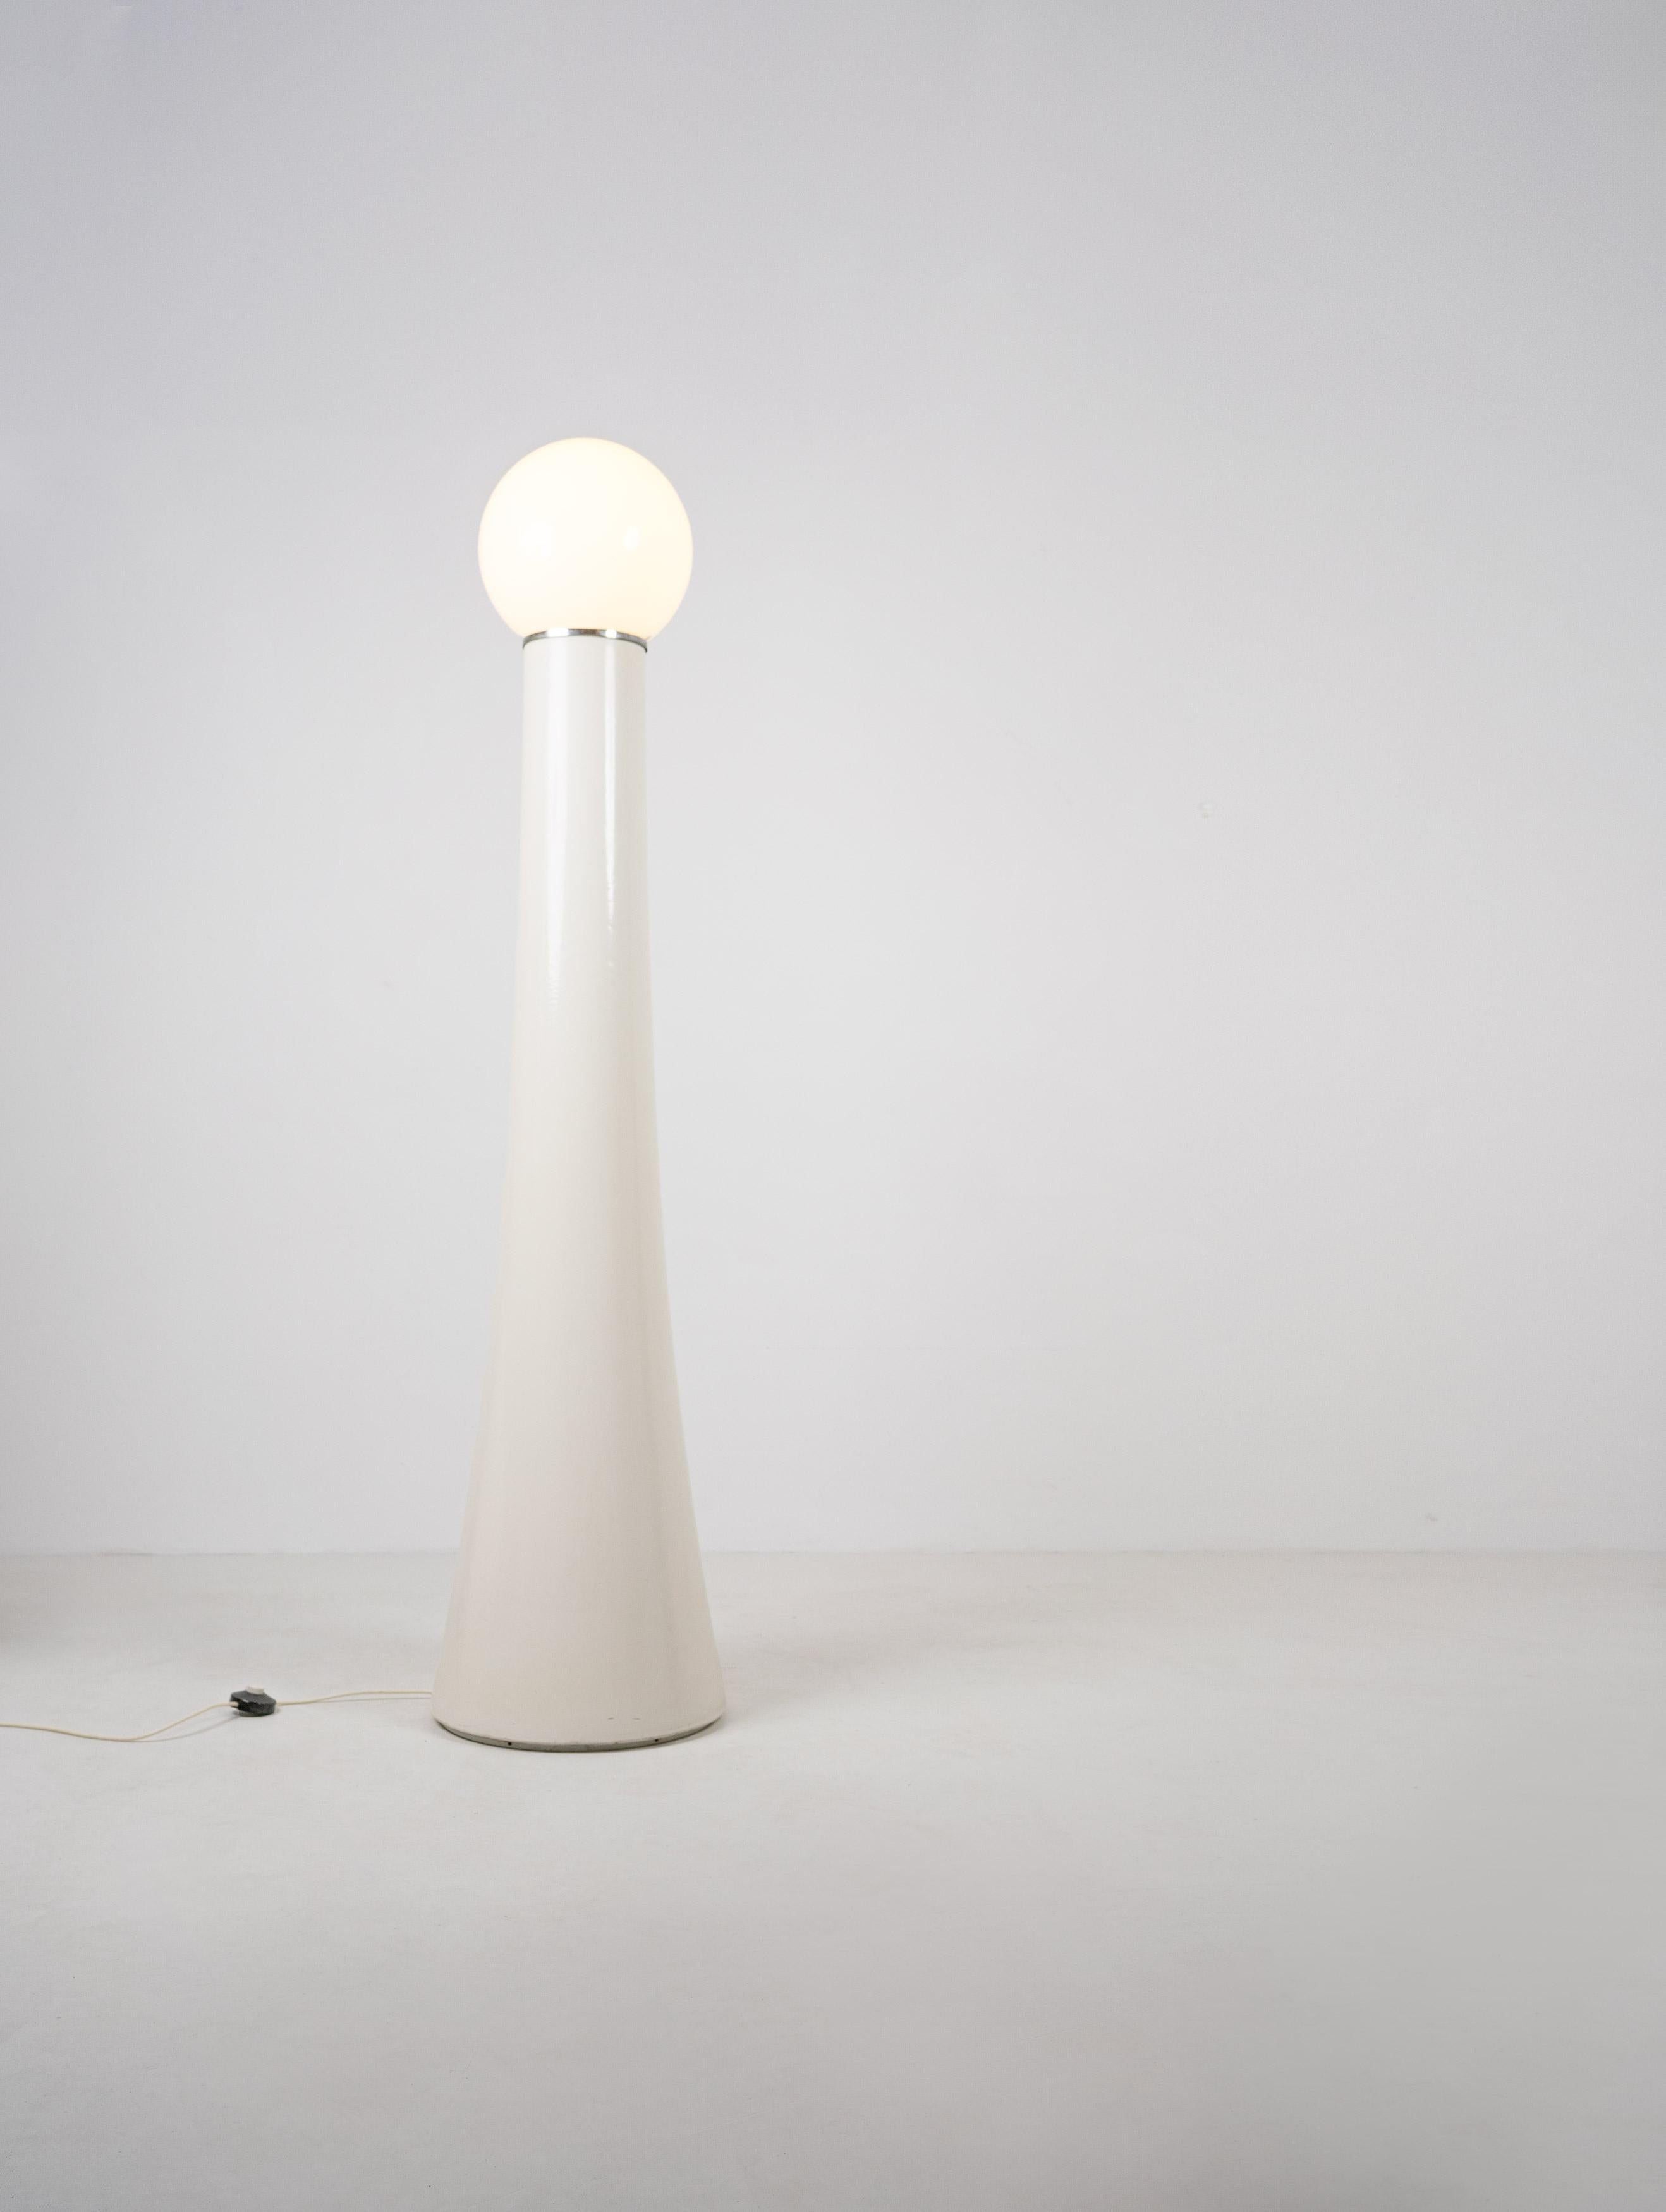 A 1970’s floor lamp designed by Annig Sarian and produced by Kartell, the Italian manufacturer synonymous with pioneering designs in plastic. 

The 4059 lamp is composed of a tall plastic and fibreglass base with a ceramic-like off white finish upon